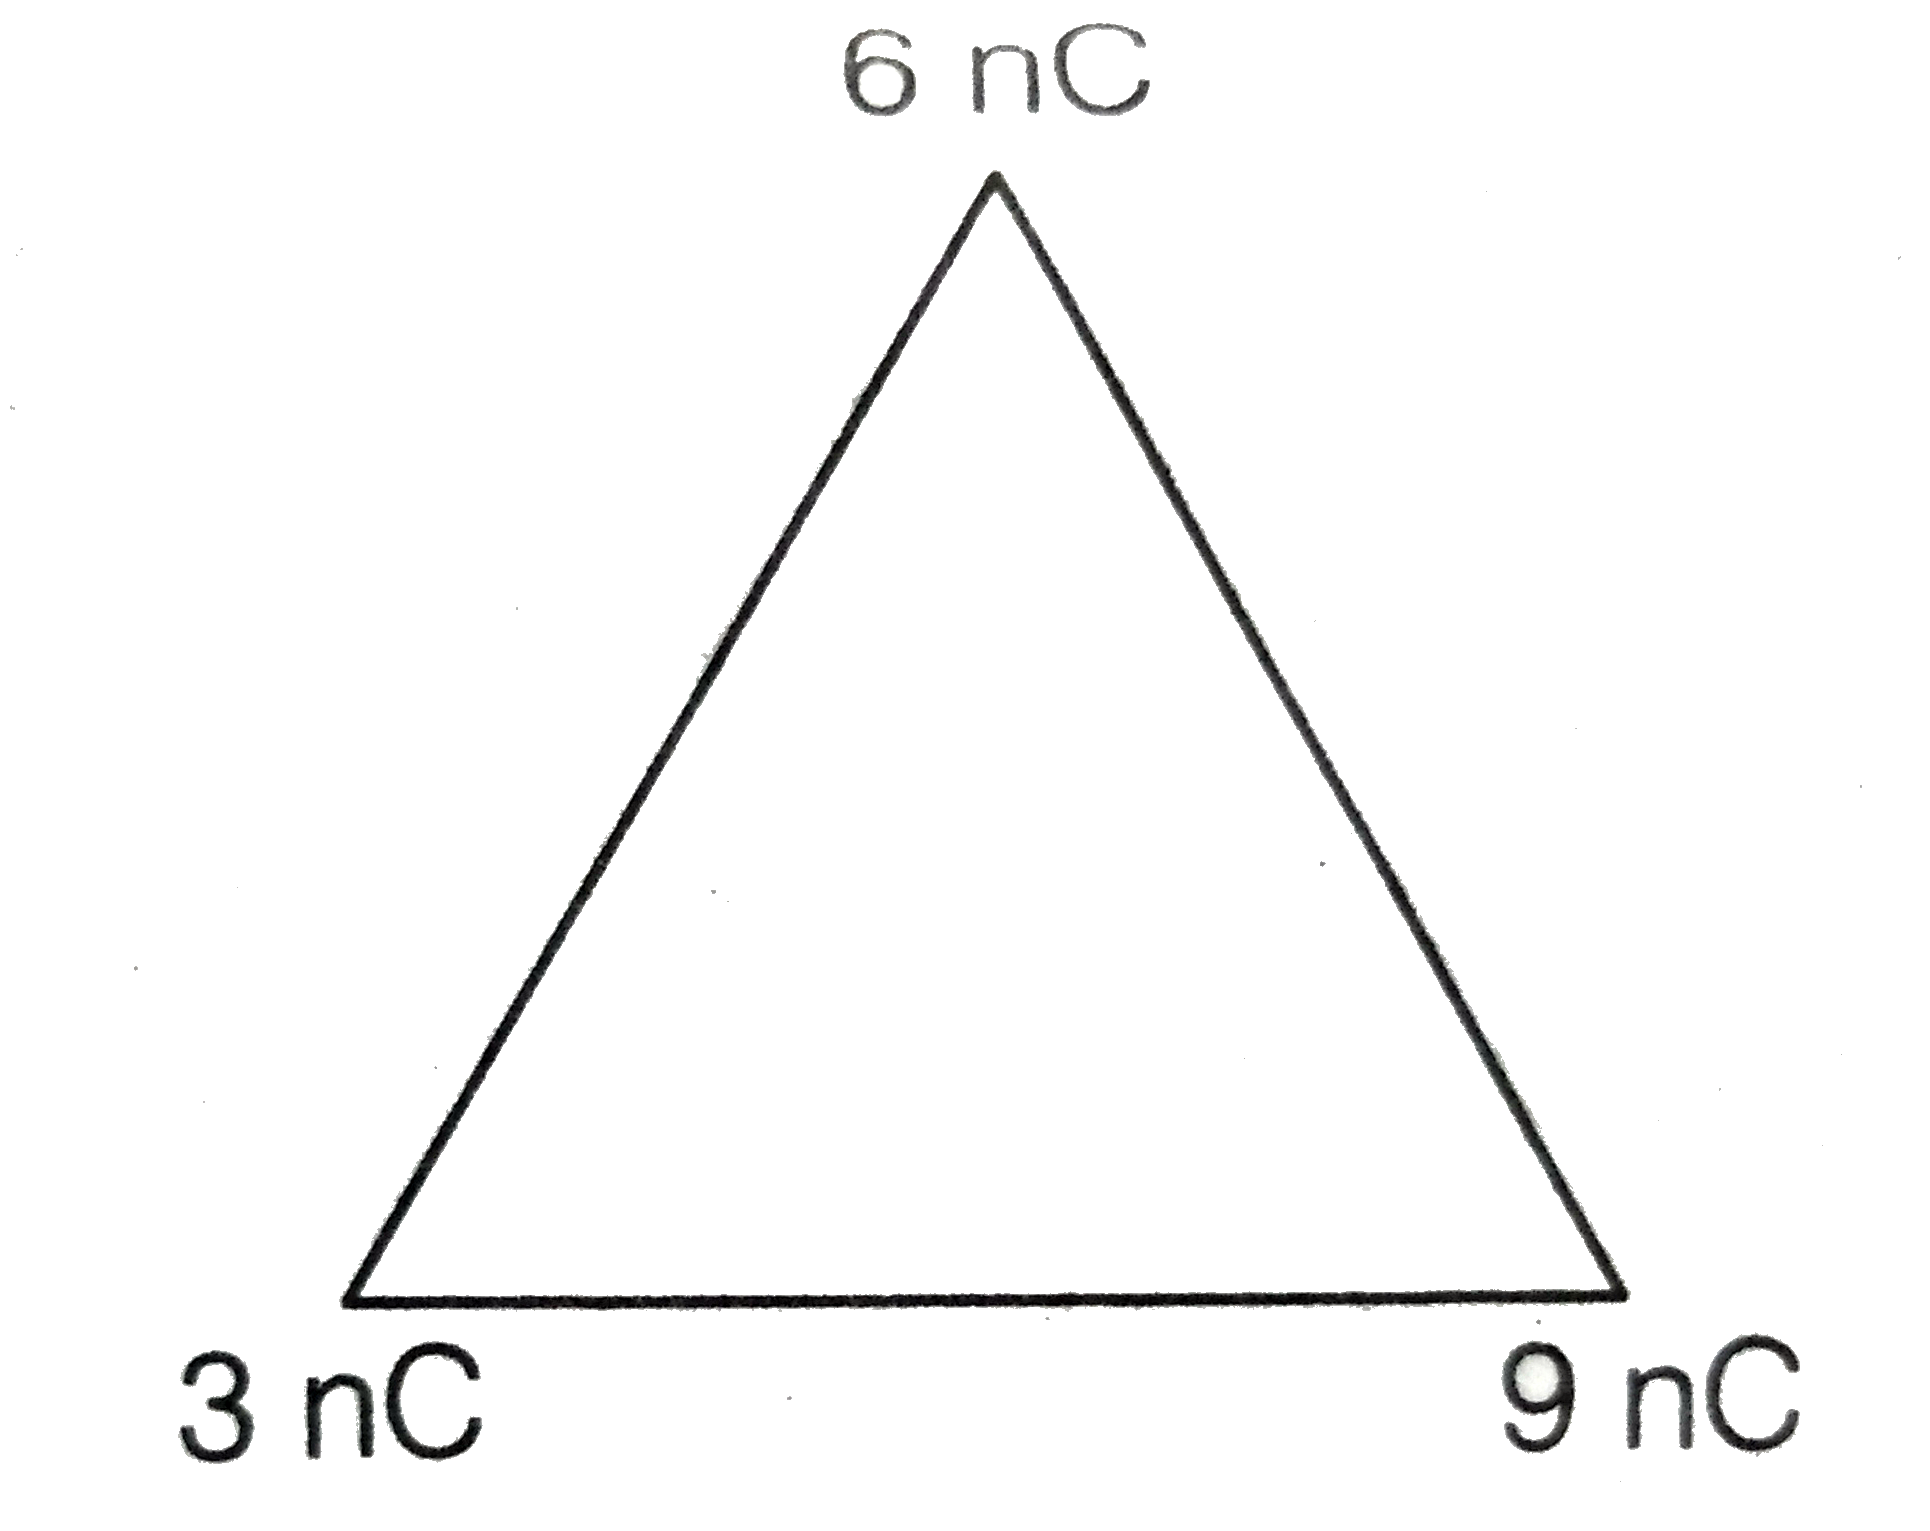 Three point charges 3nC, 6nC and 6nC are placed at the corners of an equilateral triangle of side 0.1 m. The potential energy of the system is